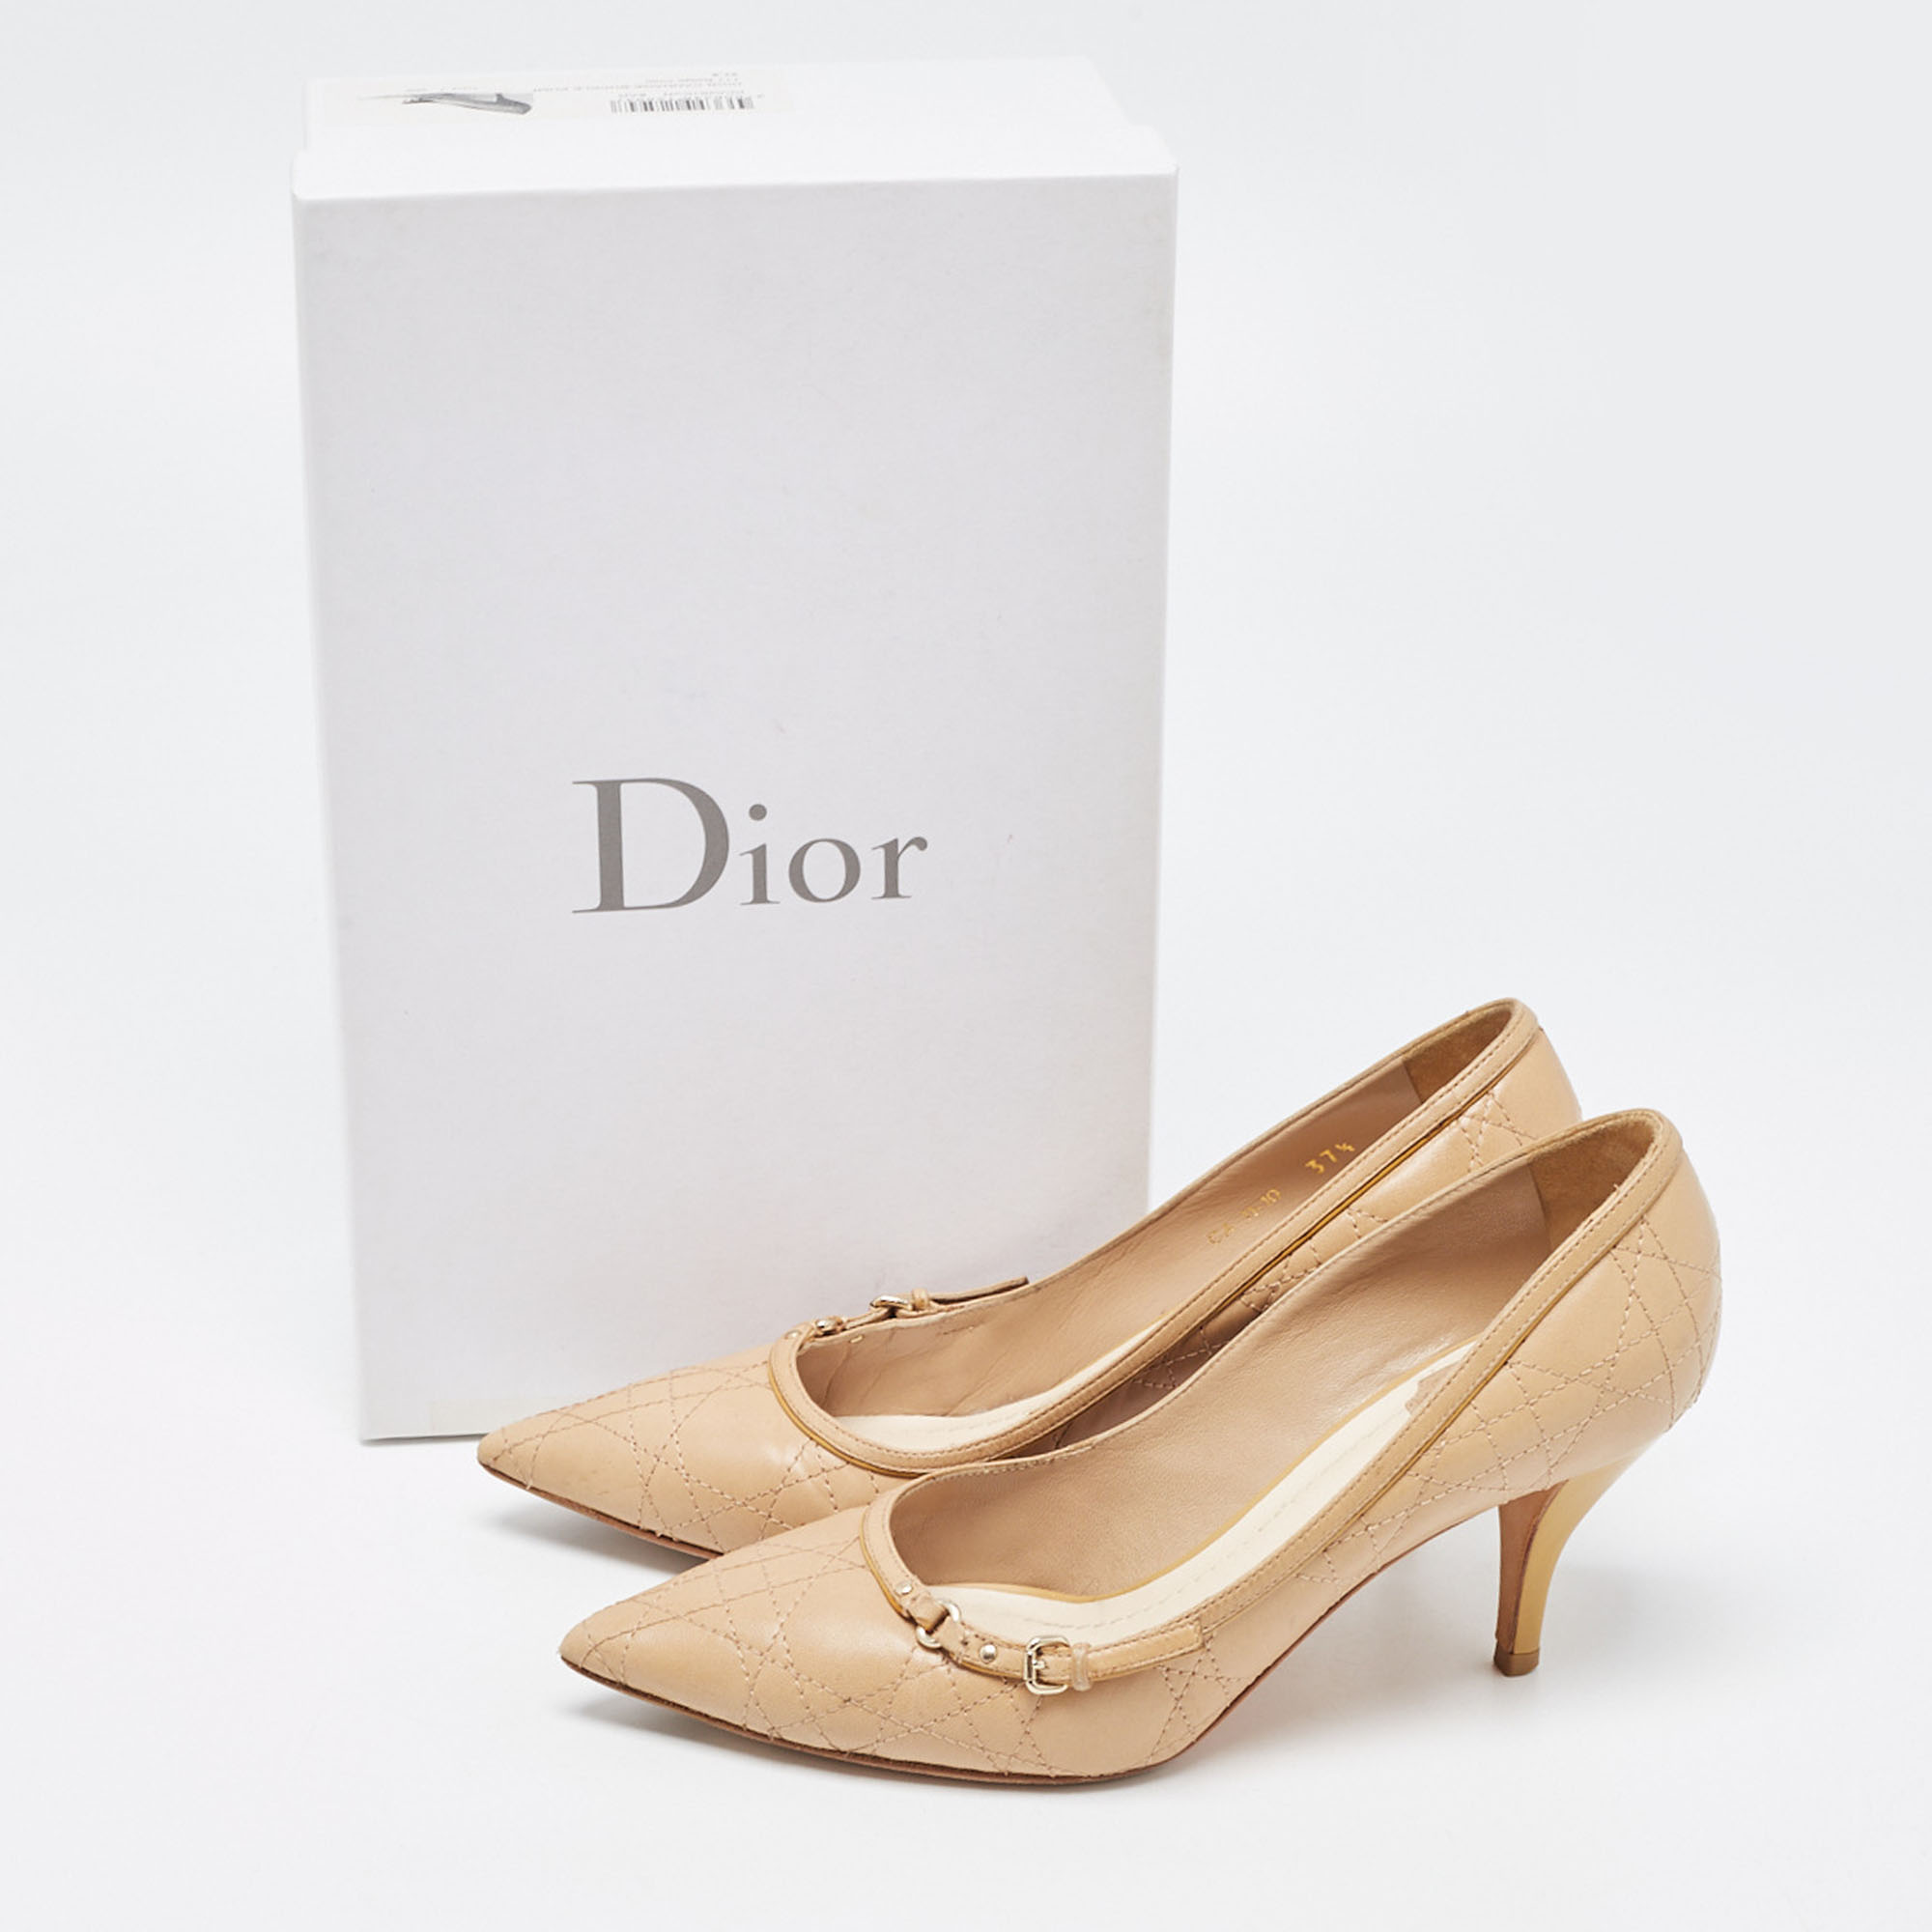 Dior Beige Cannage Leather Buckle Embellished Pointed Toe Pumps Size 37.5